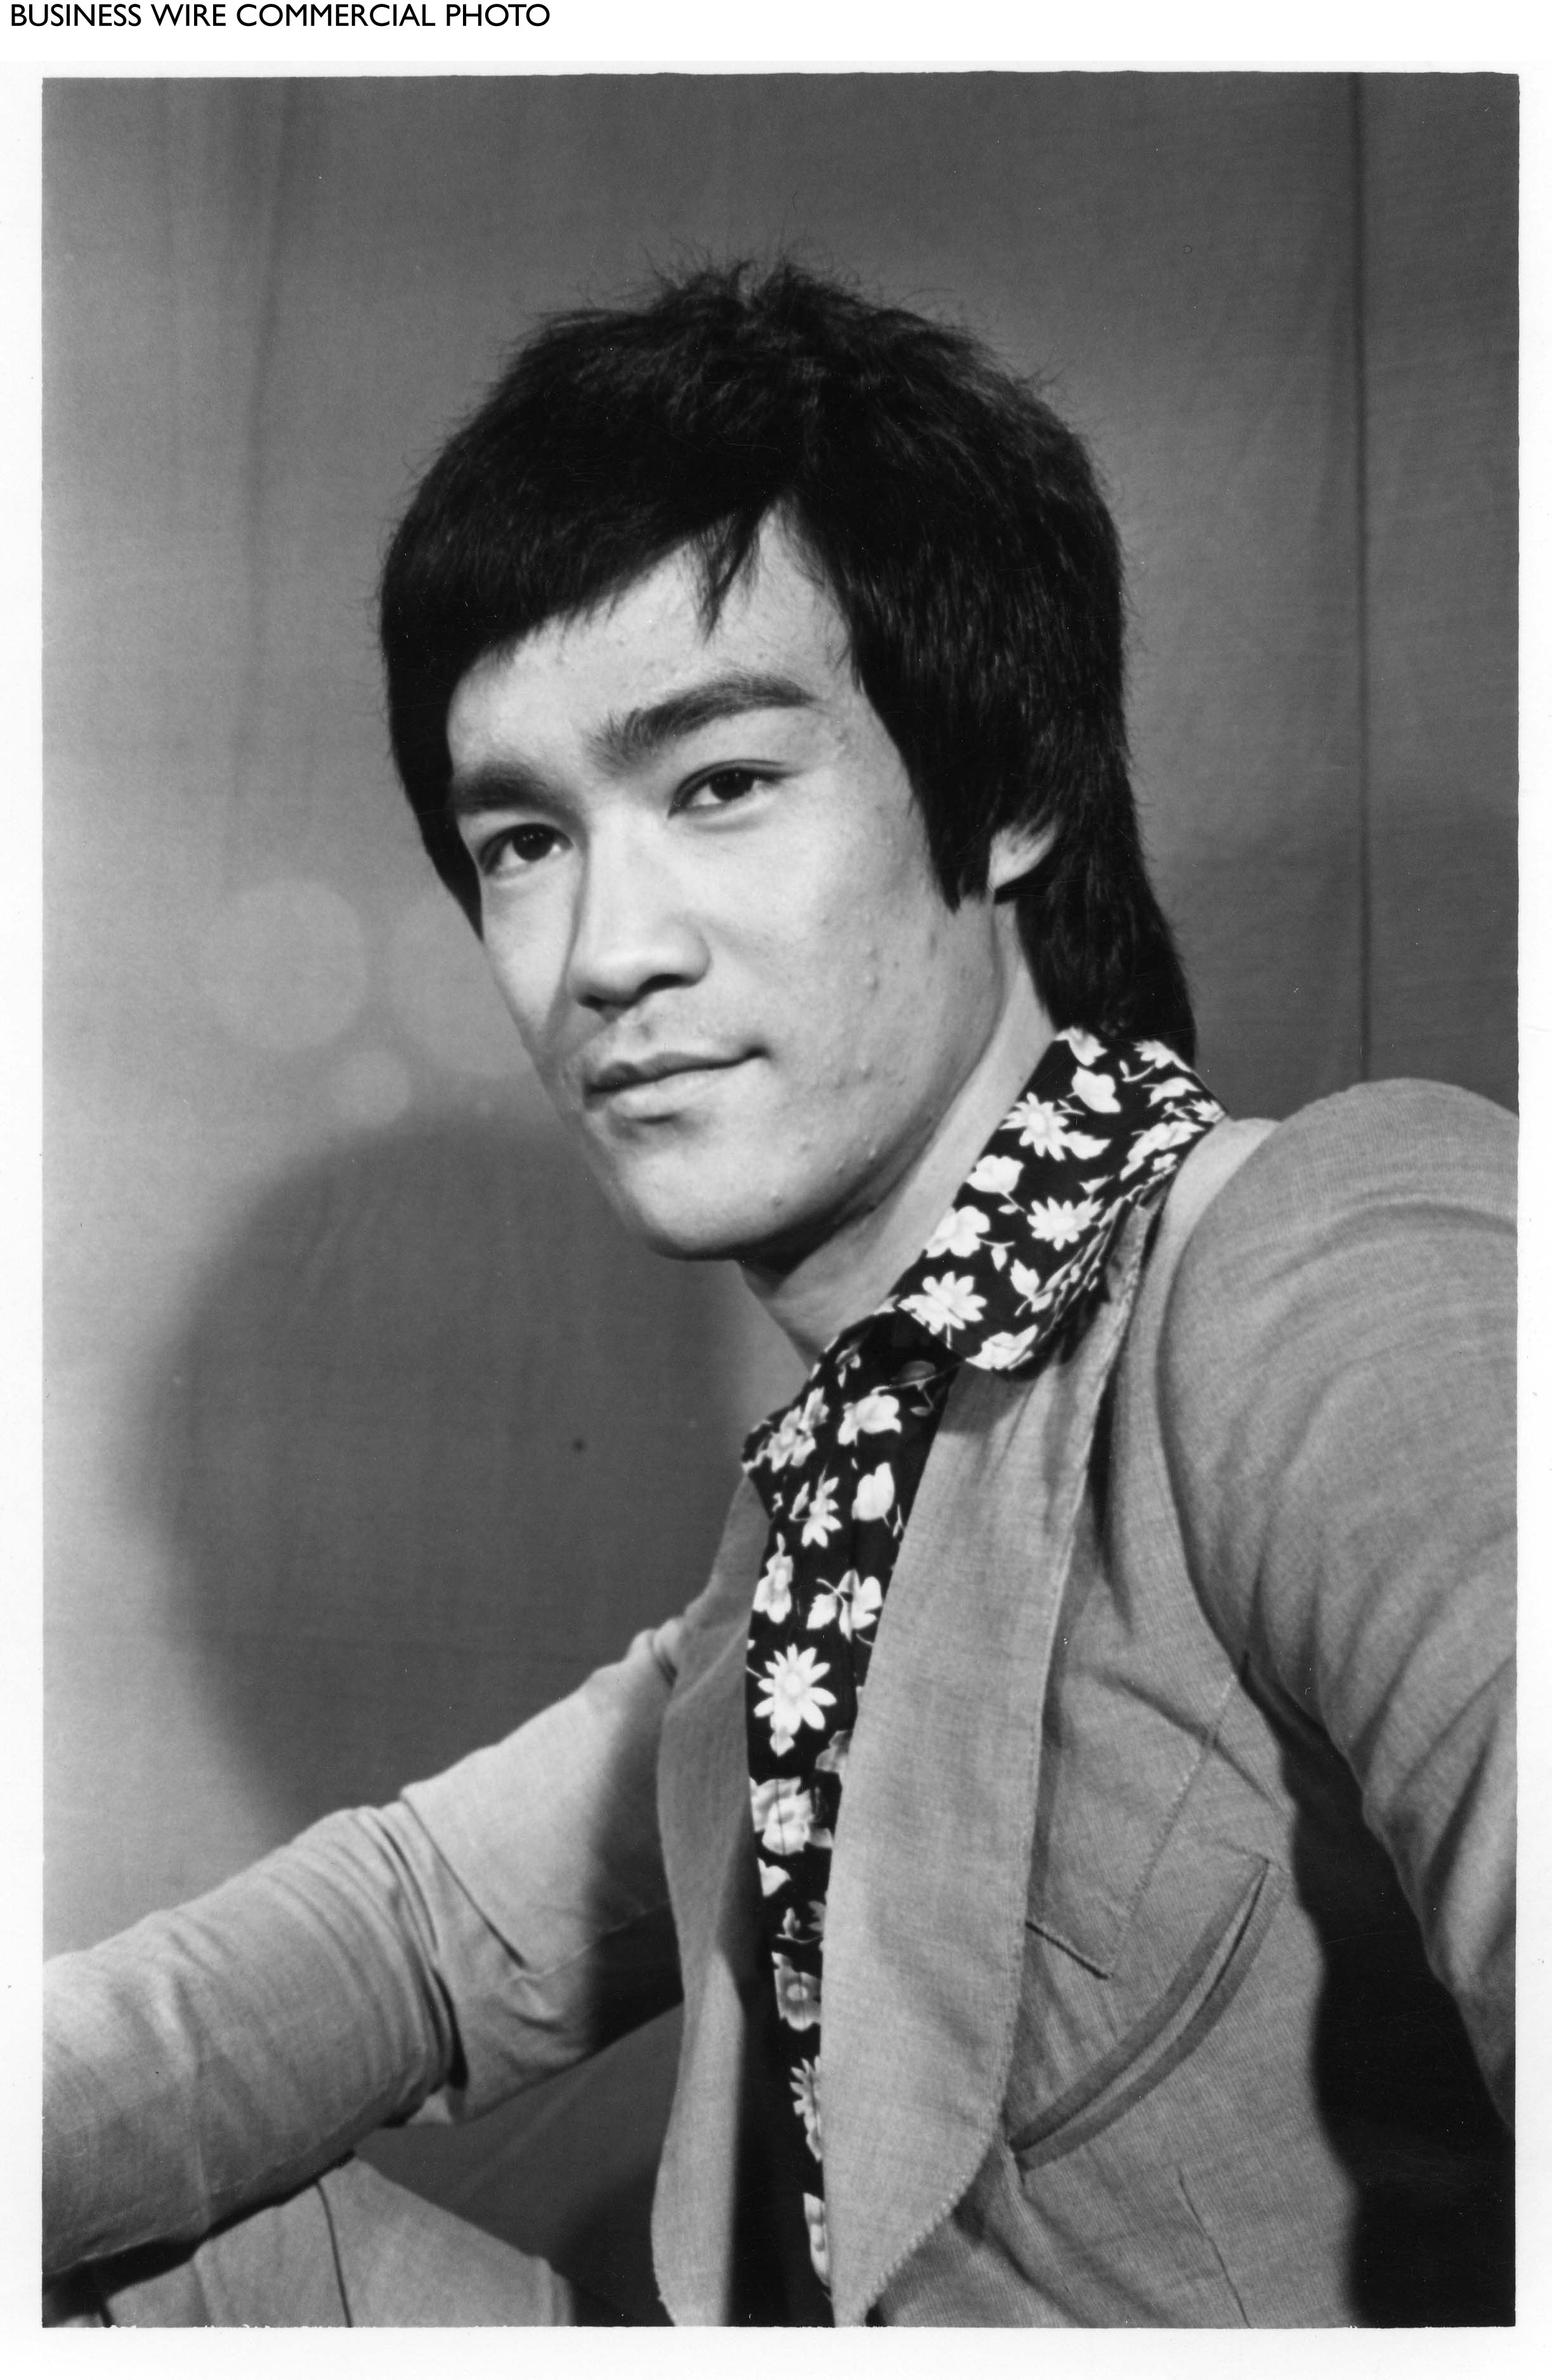 Bruce Lee fans commemorate late martial artist’s birthday | The ...